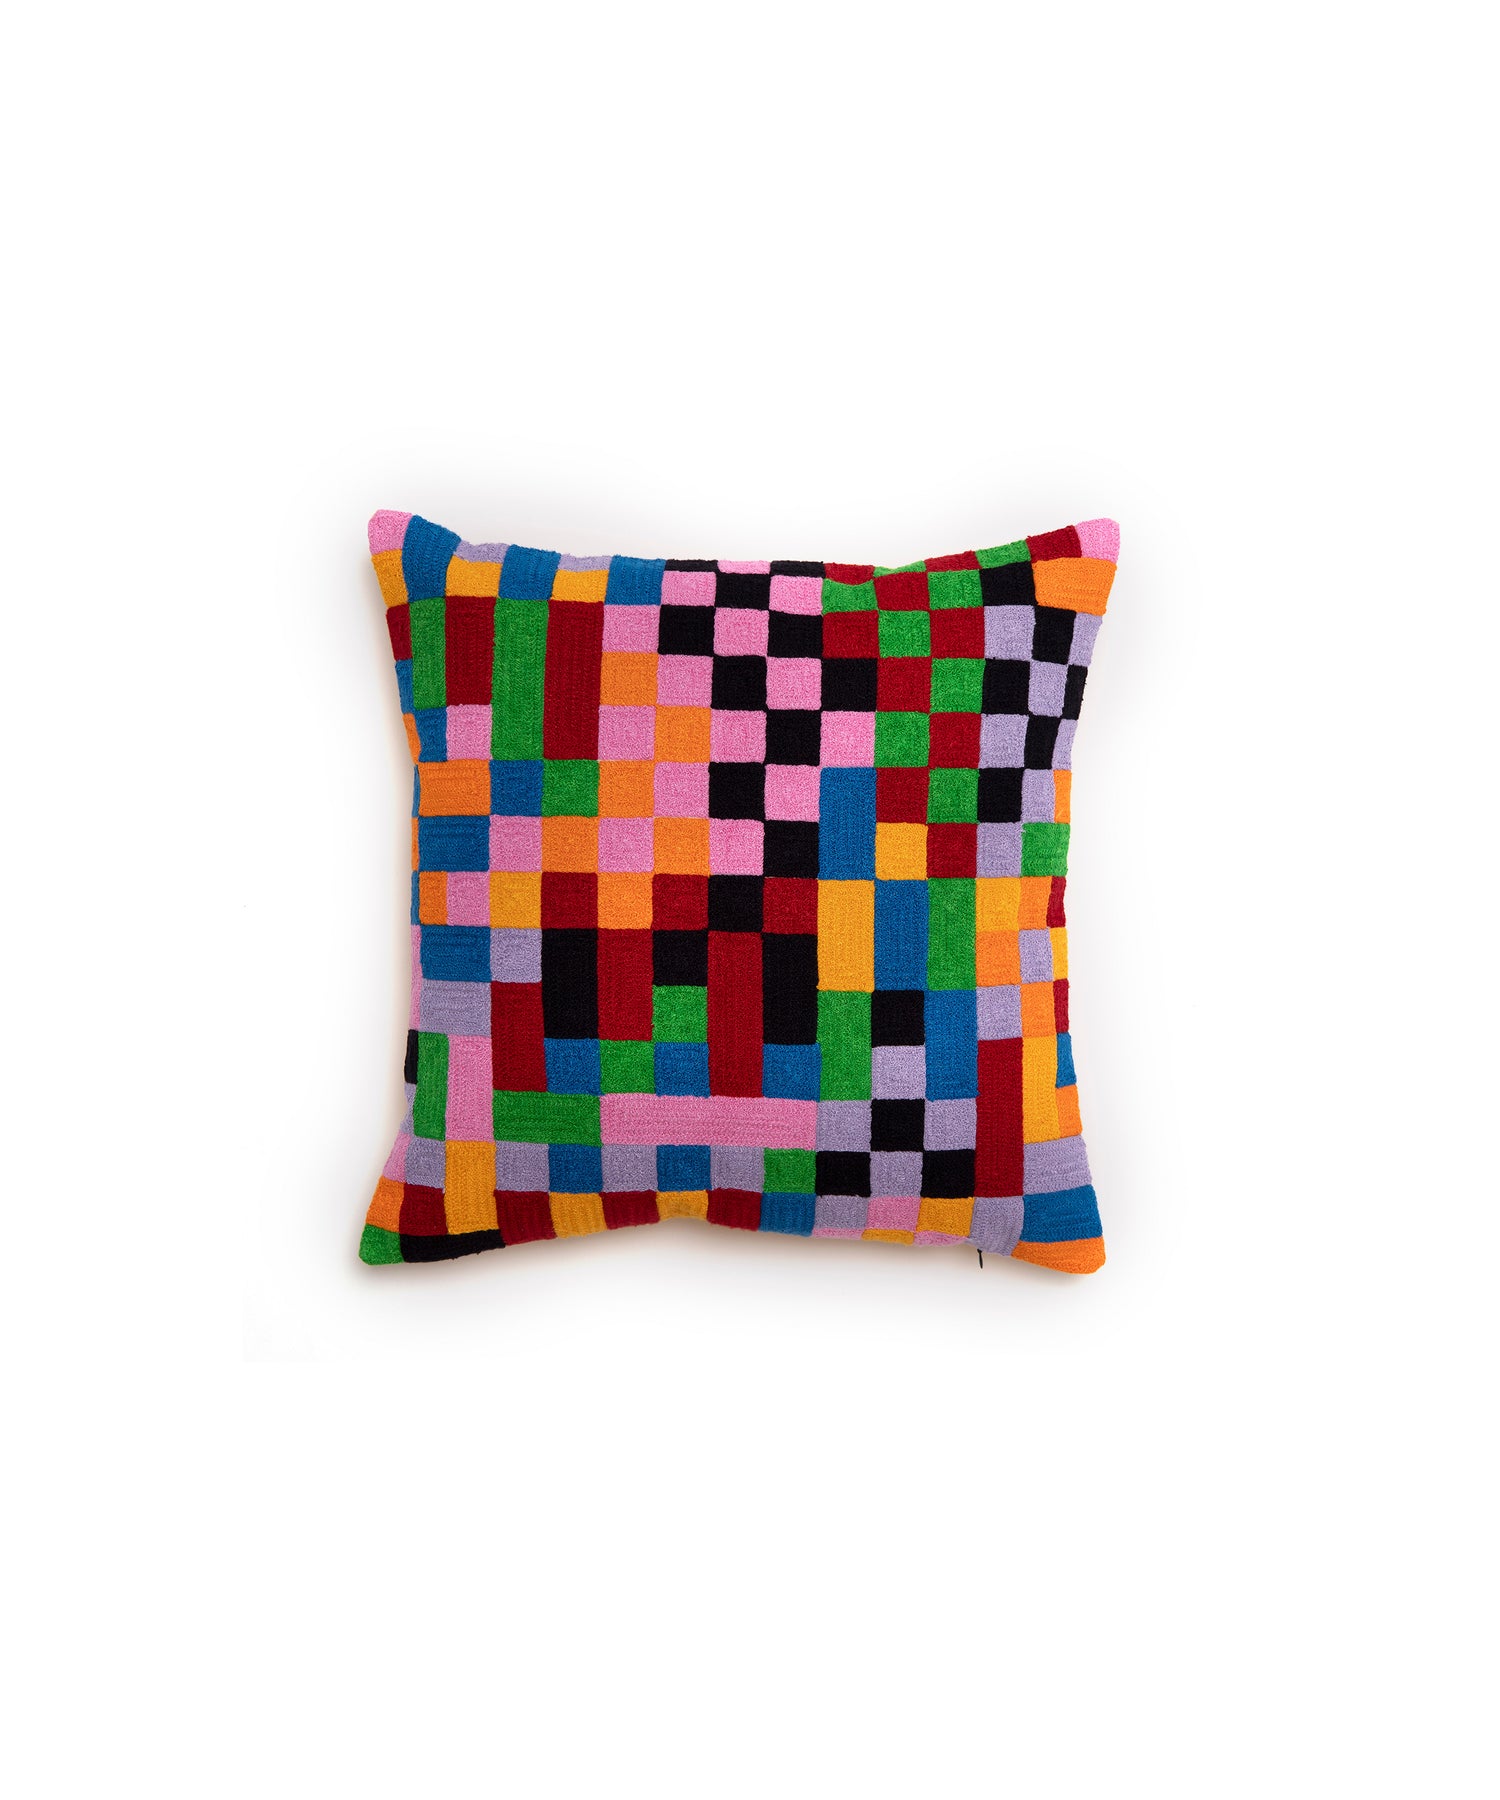 Image of the Pixels Pillow Cover with an abstract pixel design consisting of different sizes. These pixels are orange, yellow, pink, black, green, red, lavender and blue. Pillow cover is 100% cotton and measures 18 inches square. 